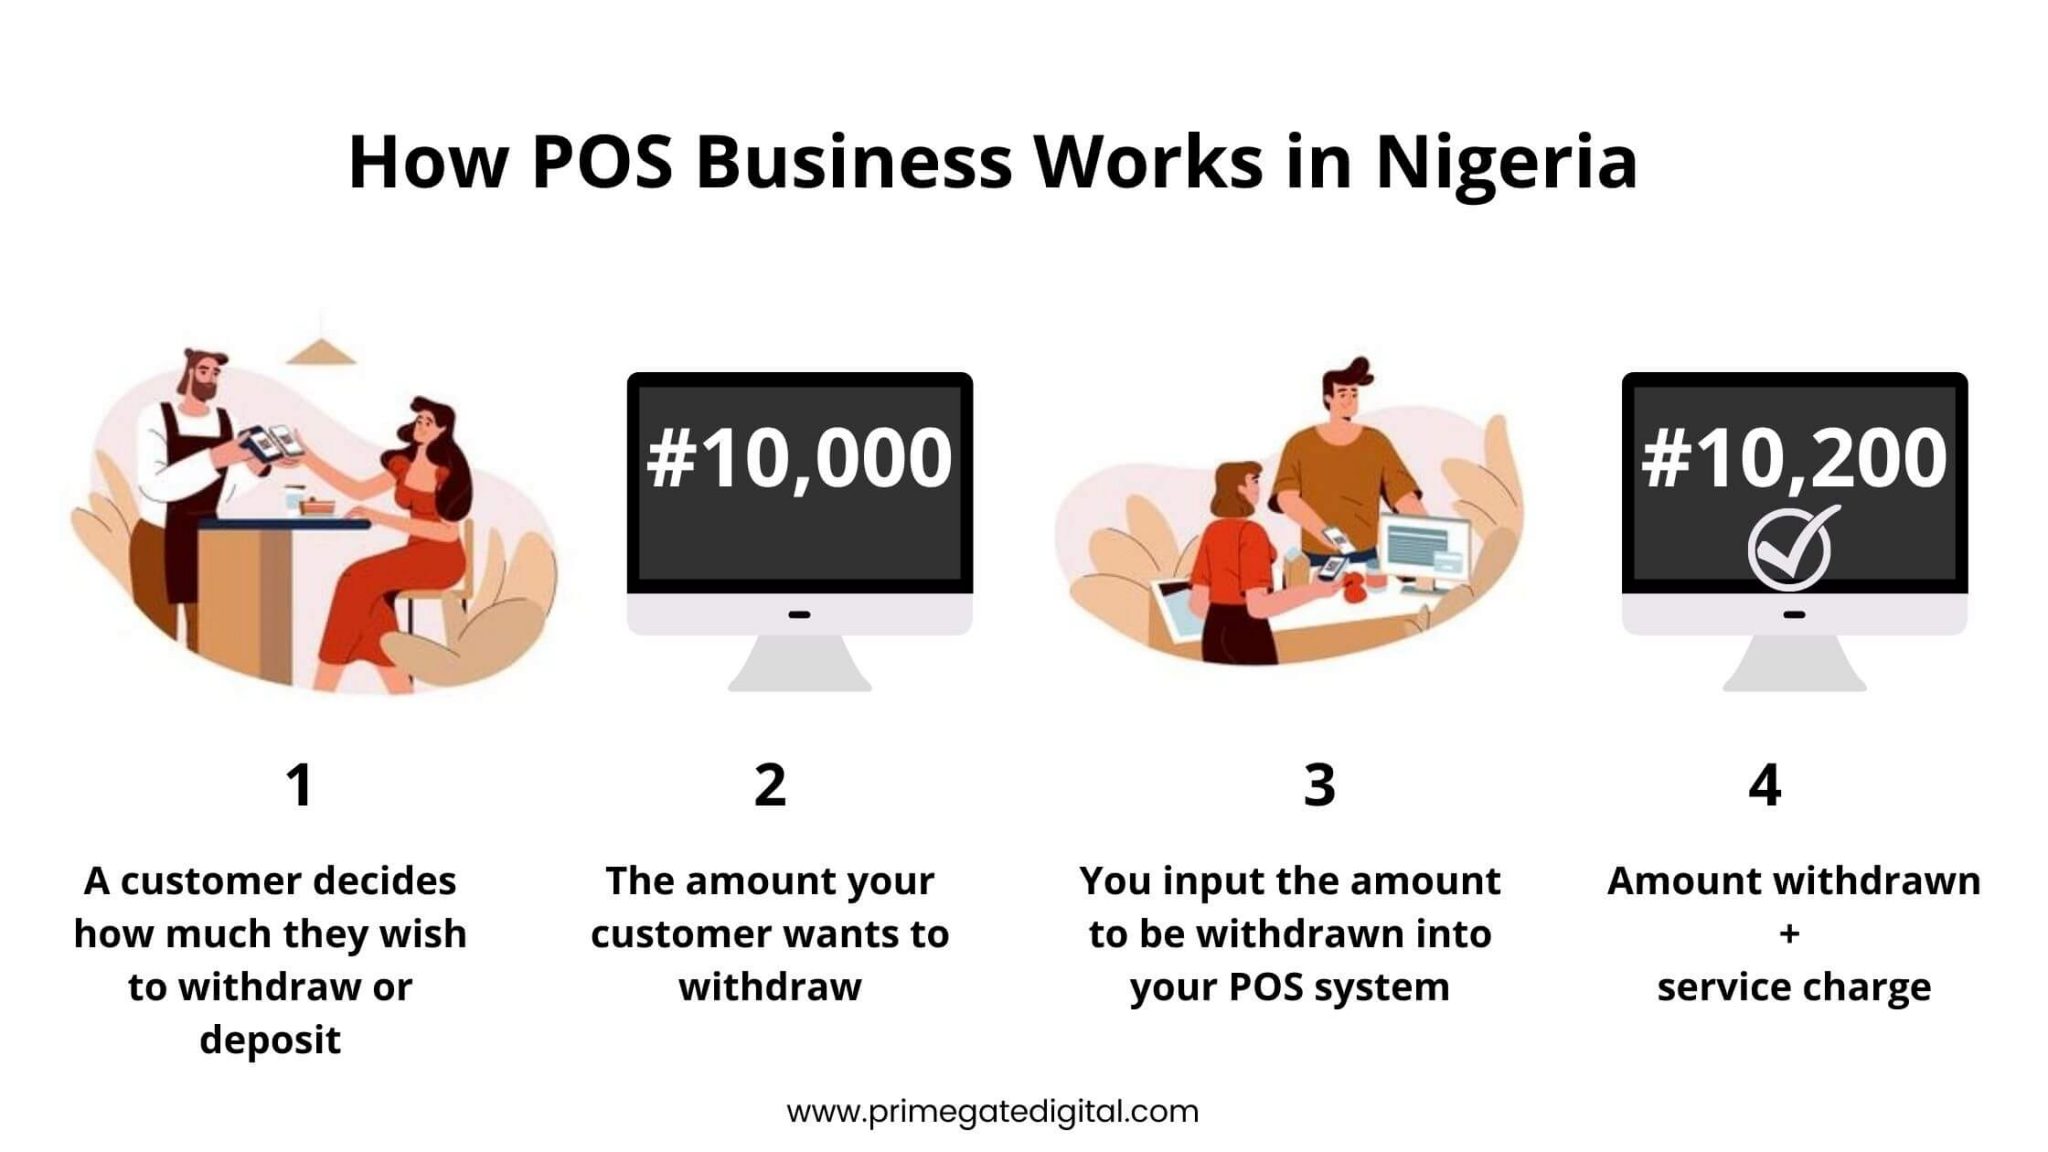 business plan for pos business in nigeria pdf